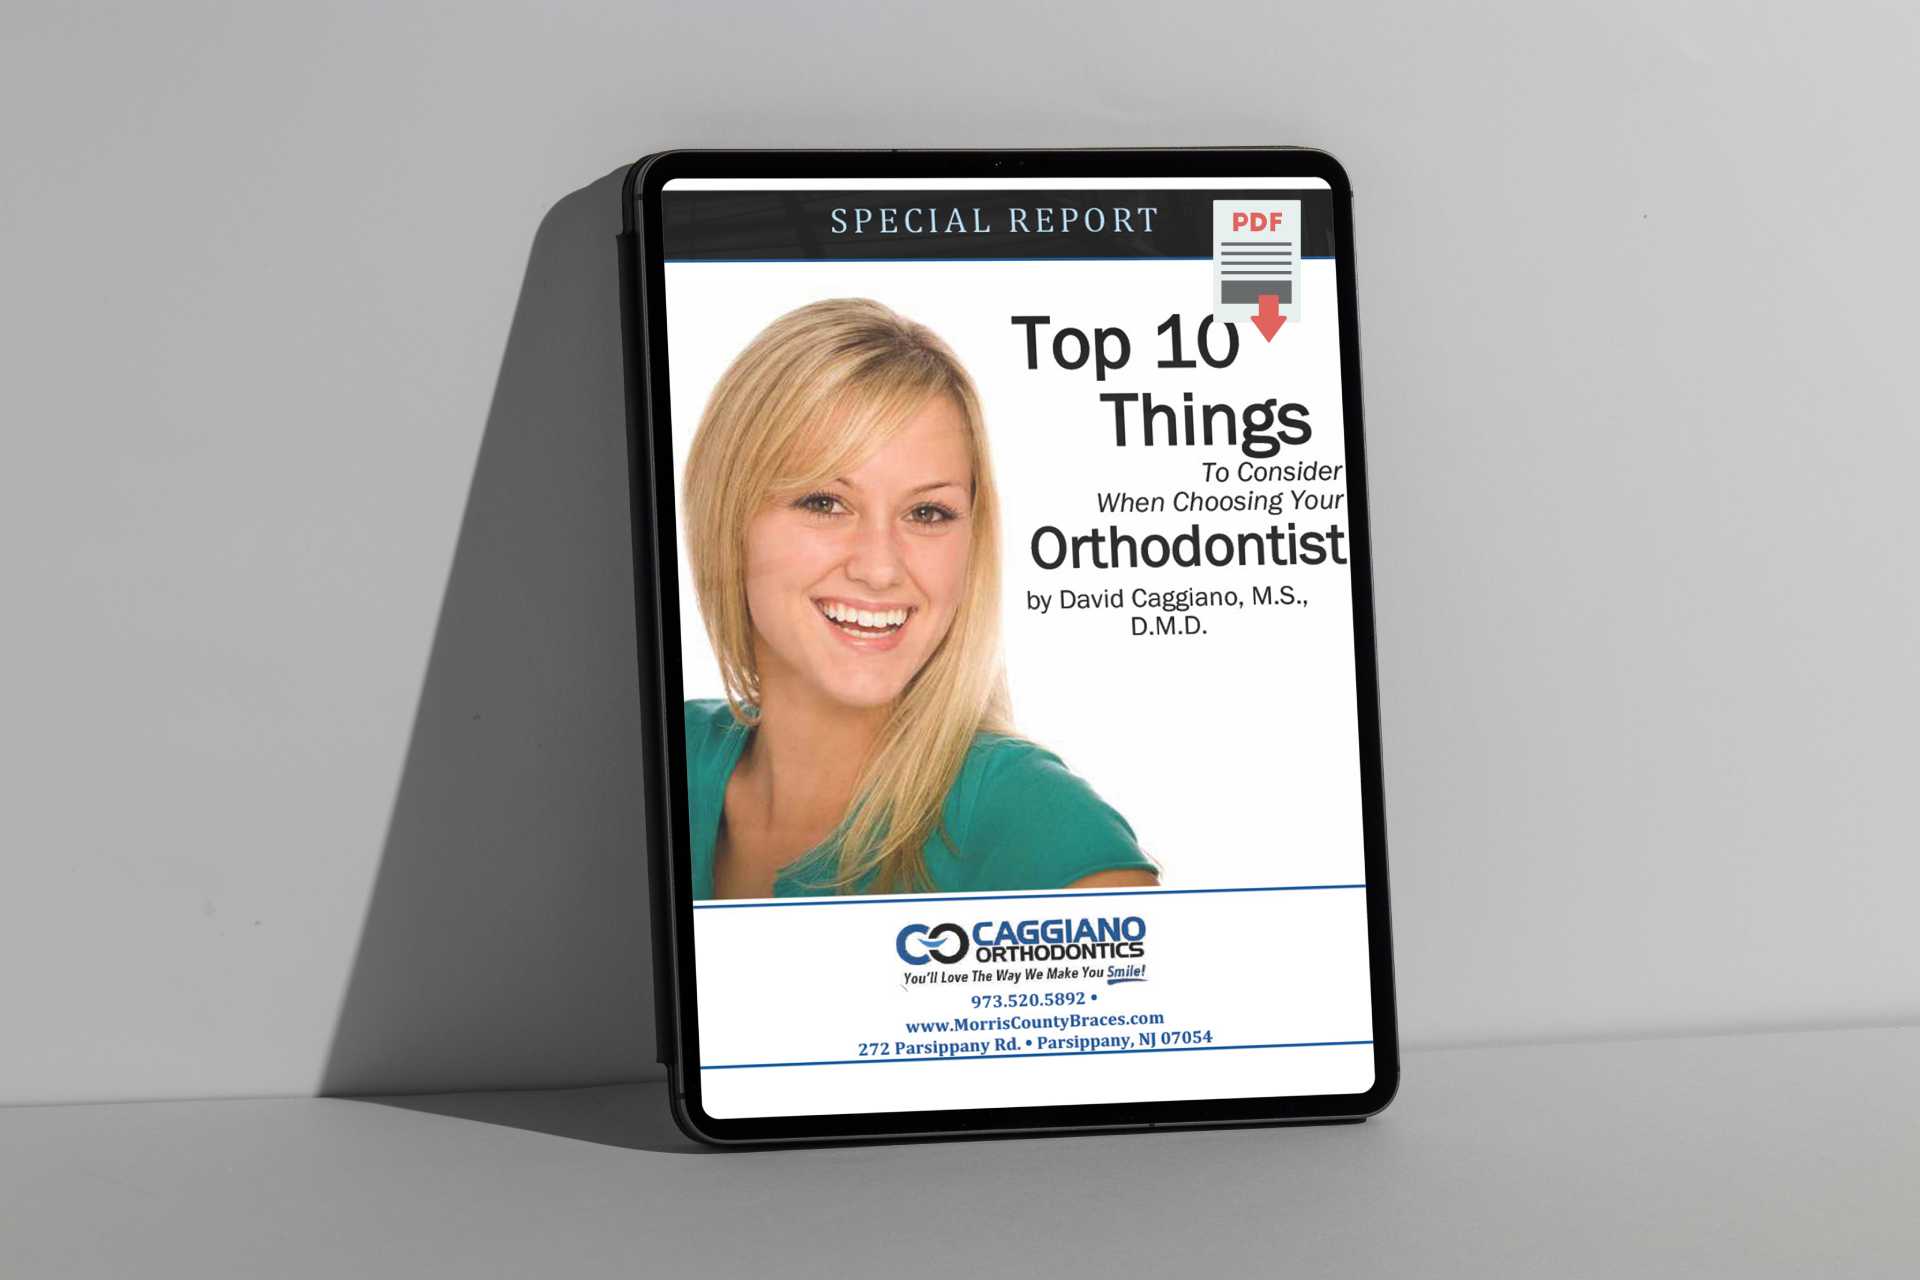 Top Ten Things to Consider When Choosing Your Orthodontist